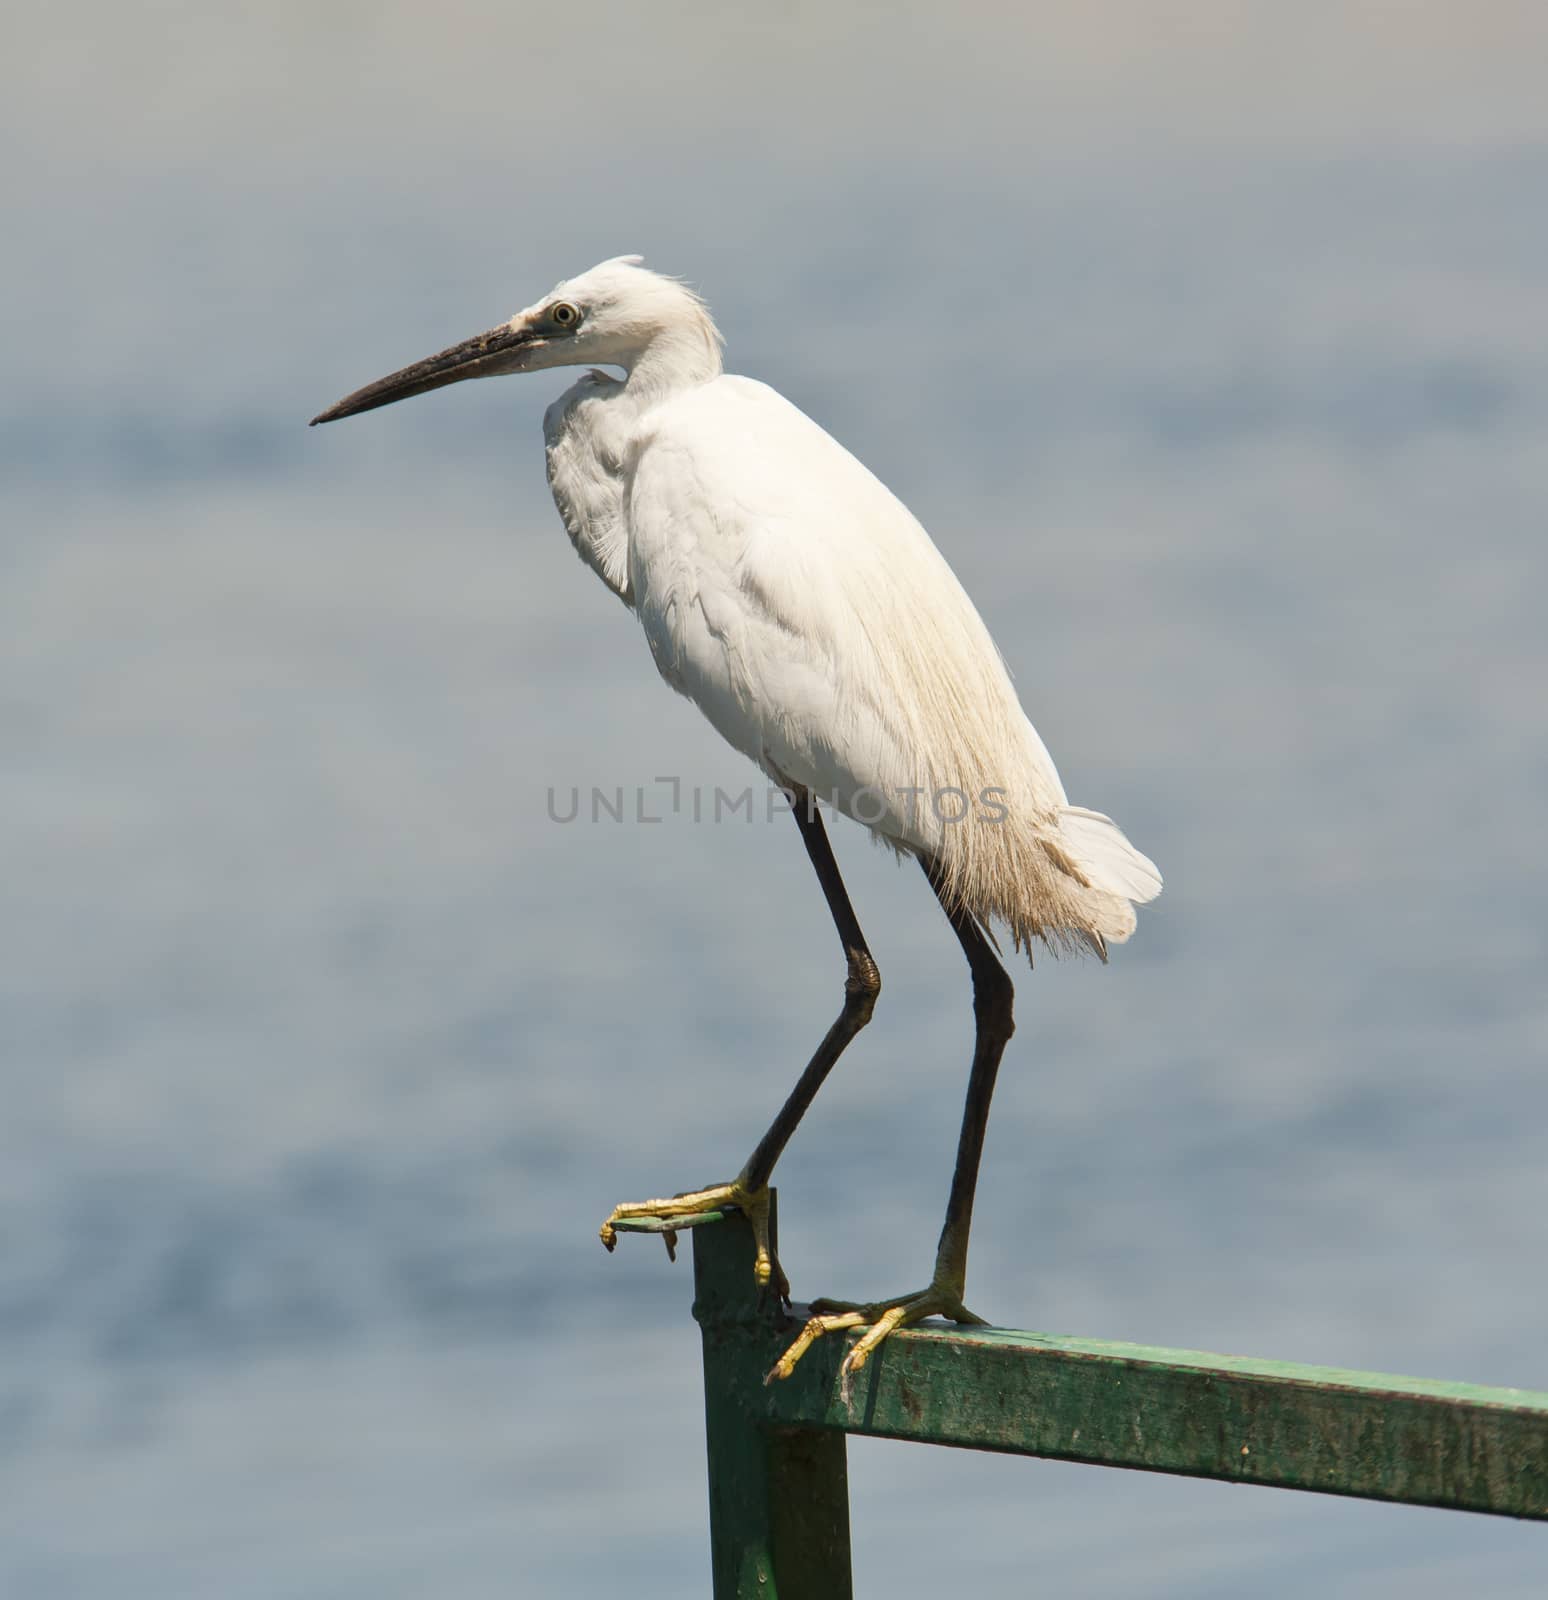 Little egret wild bird perched on a metal railing next to a river